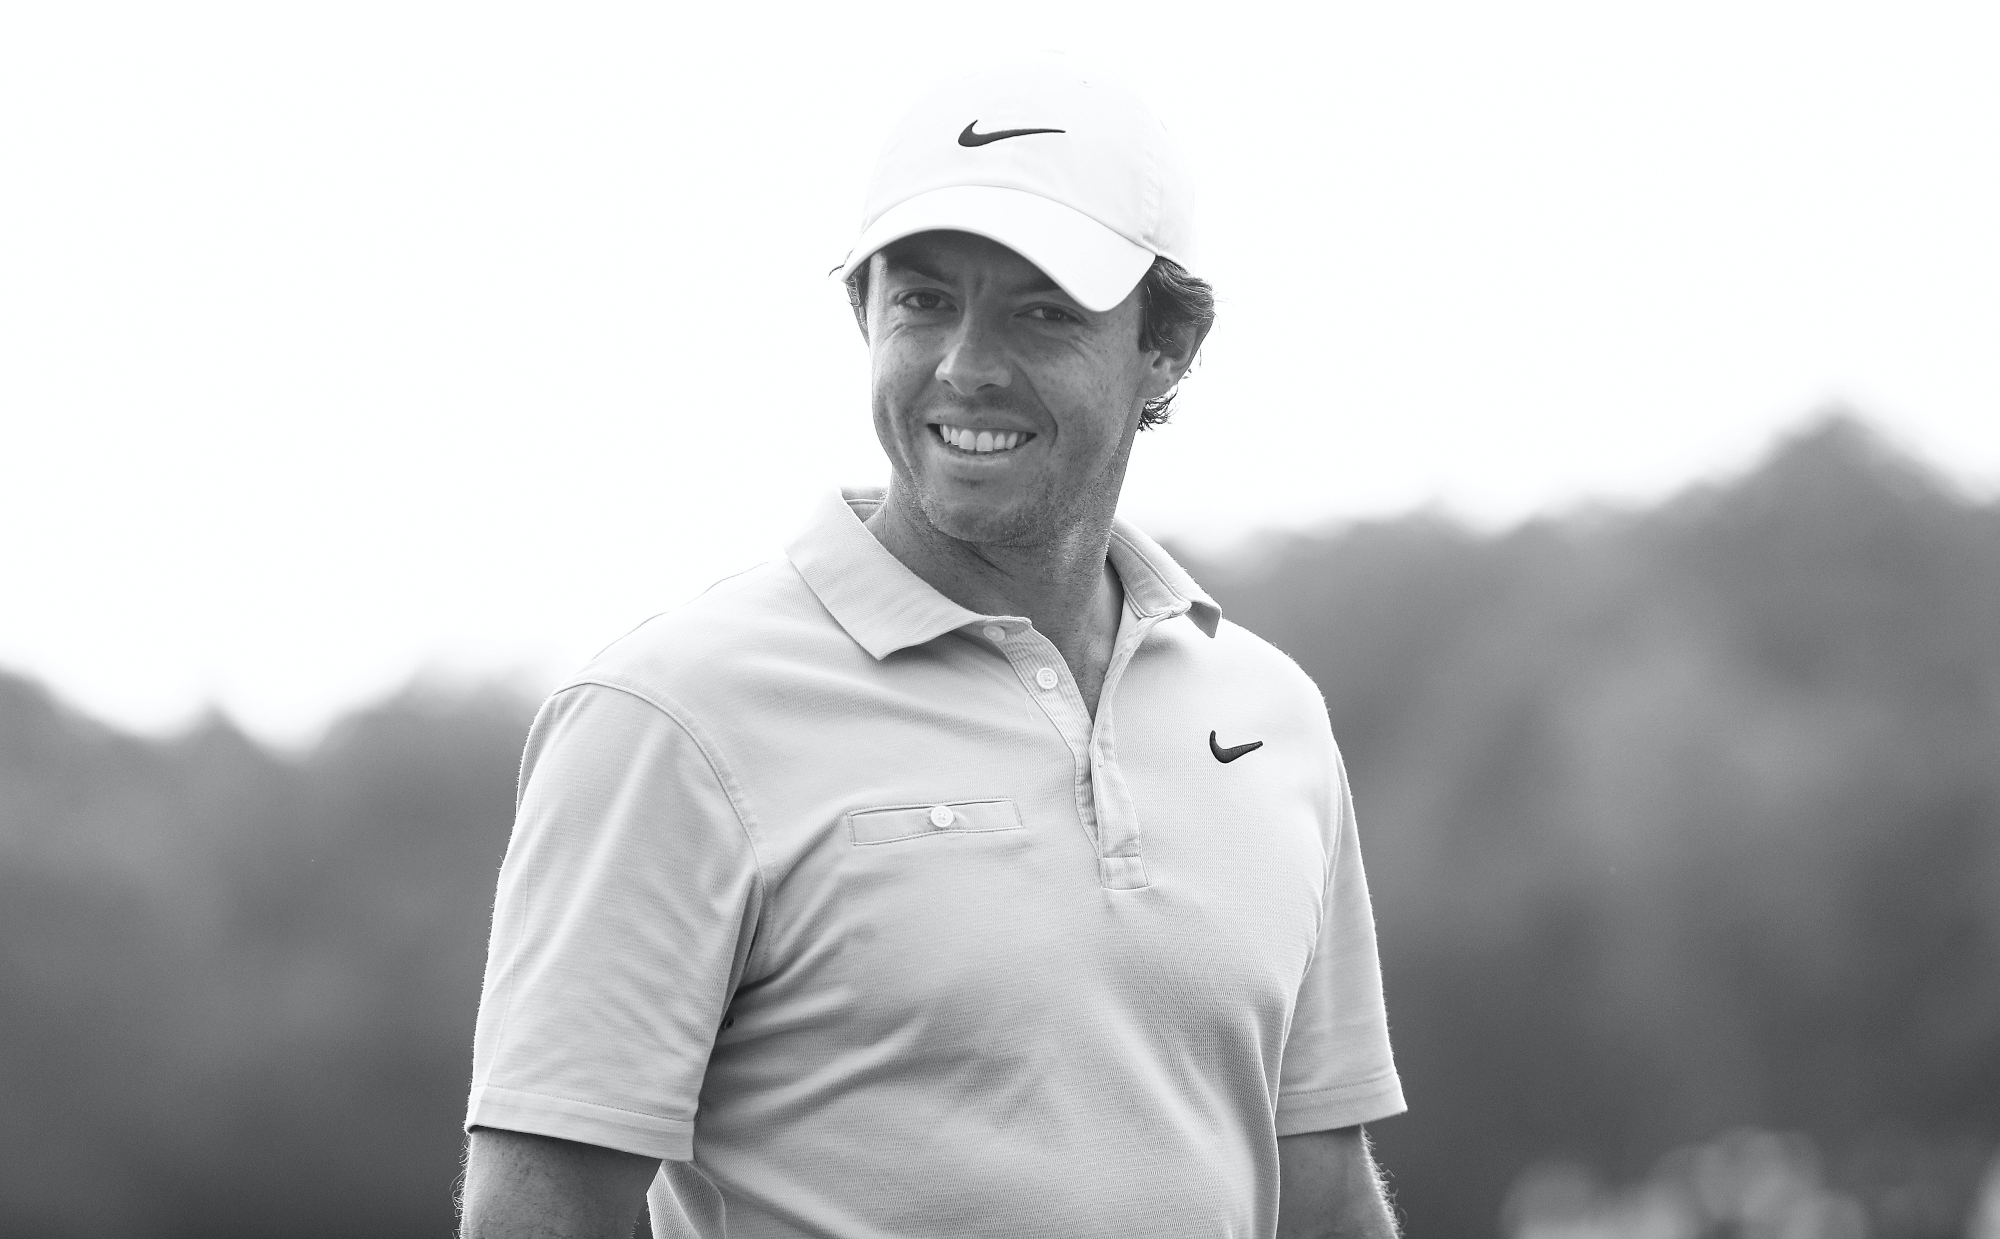 Rory McIlroy 2020 schedule